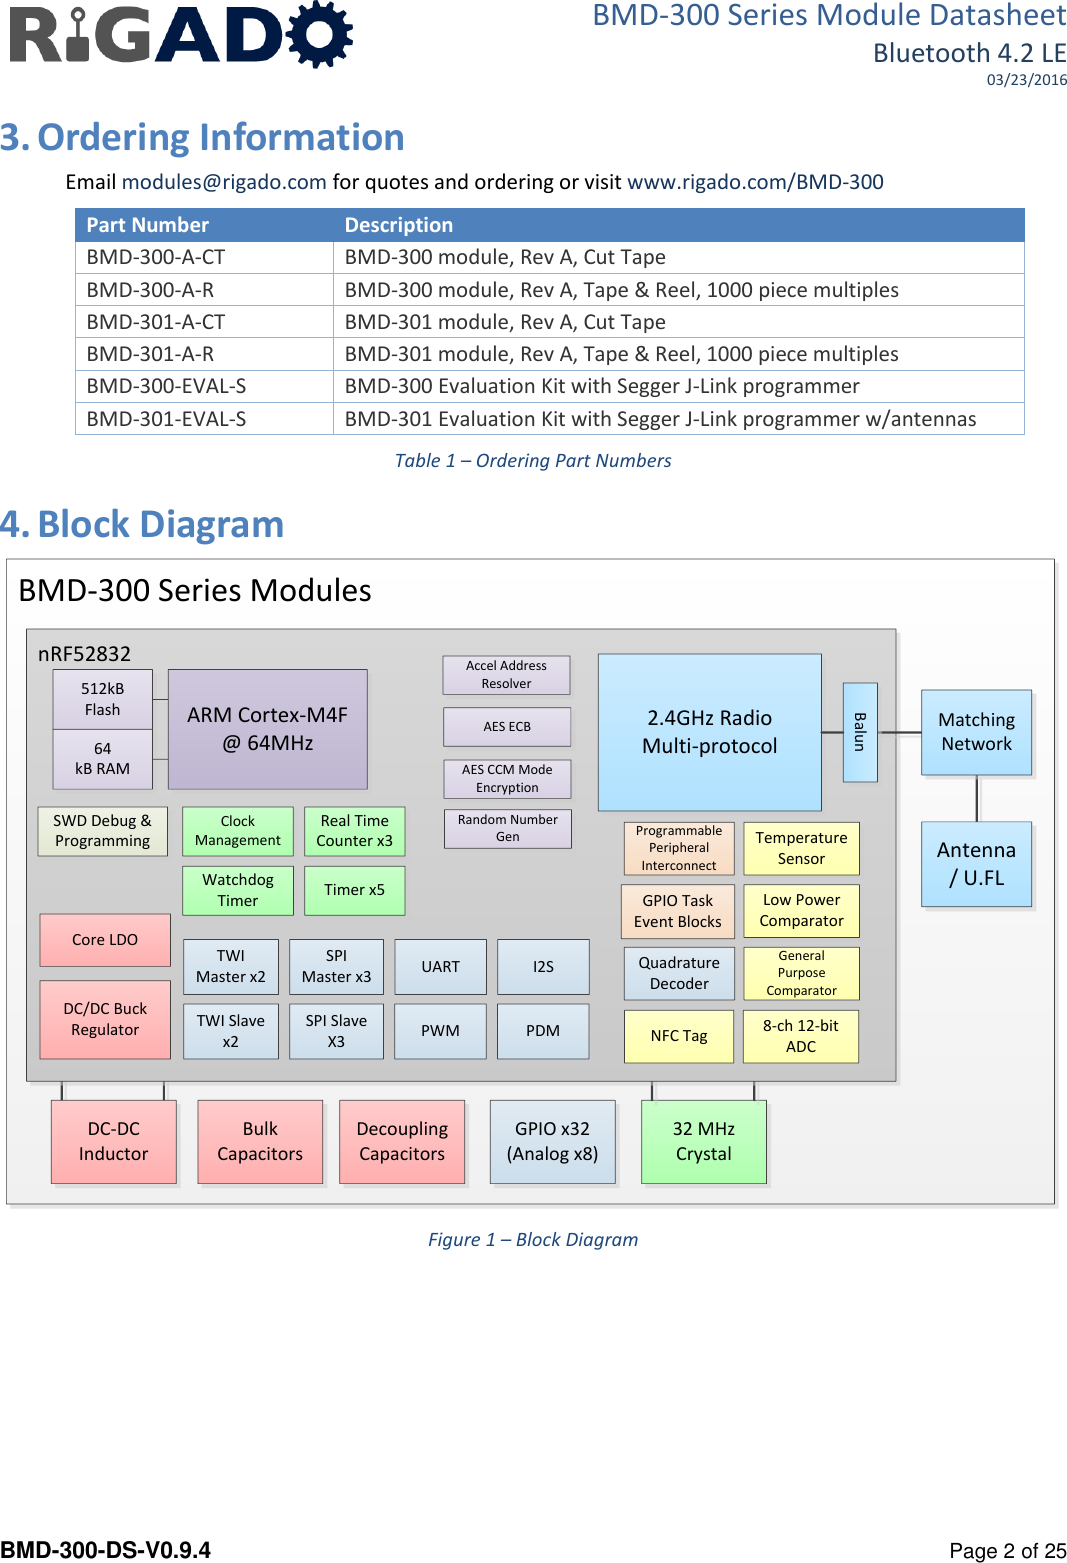 BMD-300 Series Module Datasheet Bluetooth 4.2 LE 03/23/2016  BMD-300-DS-V0.9.4      Page 2 of 25 3. Ordering Information Email modules@rigado.com for quotes and ordering or visit www.rigado.com/BMD-300 Part Number Description BMD-300-A-CT BMD-300 module, Rev A, Cut Tape BMD-300-A-R BMD-300 module, Rev A, Tape &amp; Reel, 1000 piece multiples BMD-301-A-CT BMD-301 module, Rev A, Cut Tape BMD-301-A-R BMD-301 module, Rev A, Tape &amp; Reel, 1000 piece multiples BMD-300-EVAL-S BMD-300 Evaluation Kit with Segger J-Link programmer BMD-301-EVAL-S BMD-301 Evaluation Kit with Segger J-Link programmer w/antennas Table 1 – Ordering Part Numbers 4. Block Diagram BMD-300 Series Modules32 MHz CrystalnRF52832512kB FlashDC-DC InductorDecoupling CapacitorsBulk Capacitors2.4GHz RadioMulti-protocolTWI Master x2SPI Master x3SPI SlaveX3DC/DC Buck RegulatorCore LDO64kB RAMLow Power Comparator8-ch 12-bit ADCUART Quadrature DecoderSWD Debug &amp; Programming  Temperature SensorClock ManagementWatchdog TimerRandom Number GenTimer x5Accel Address ResolverAES CCM Mode EncryptionAES ECBReal Time Counter x3GPIO Task Event BlocksProgrammable Peripheral InterconnectARM Cortex-M4F@ 64MHz Matching NetworkAntenna / U.FLGPIO x32(Analog x8)I2STWI Slave x2 PWM PDMGeneral Purpose ComparatorNFC TagBalun Figure 1 – Block Diagram    